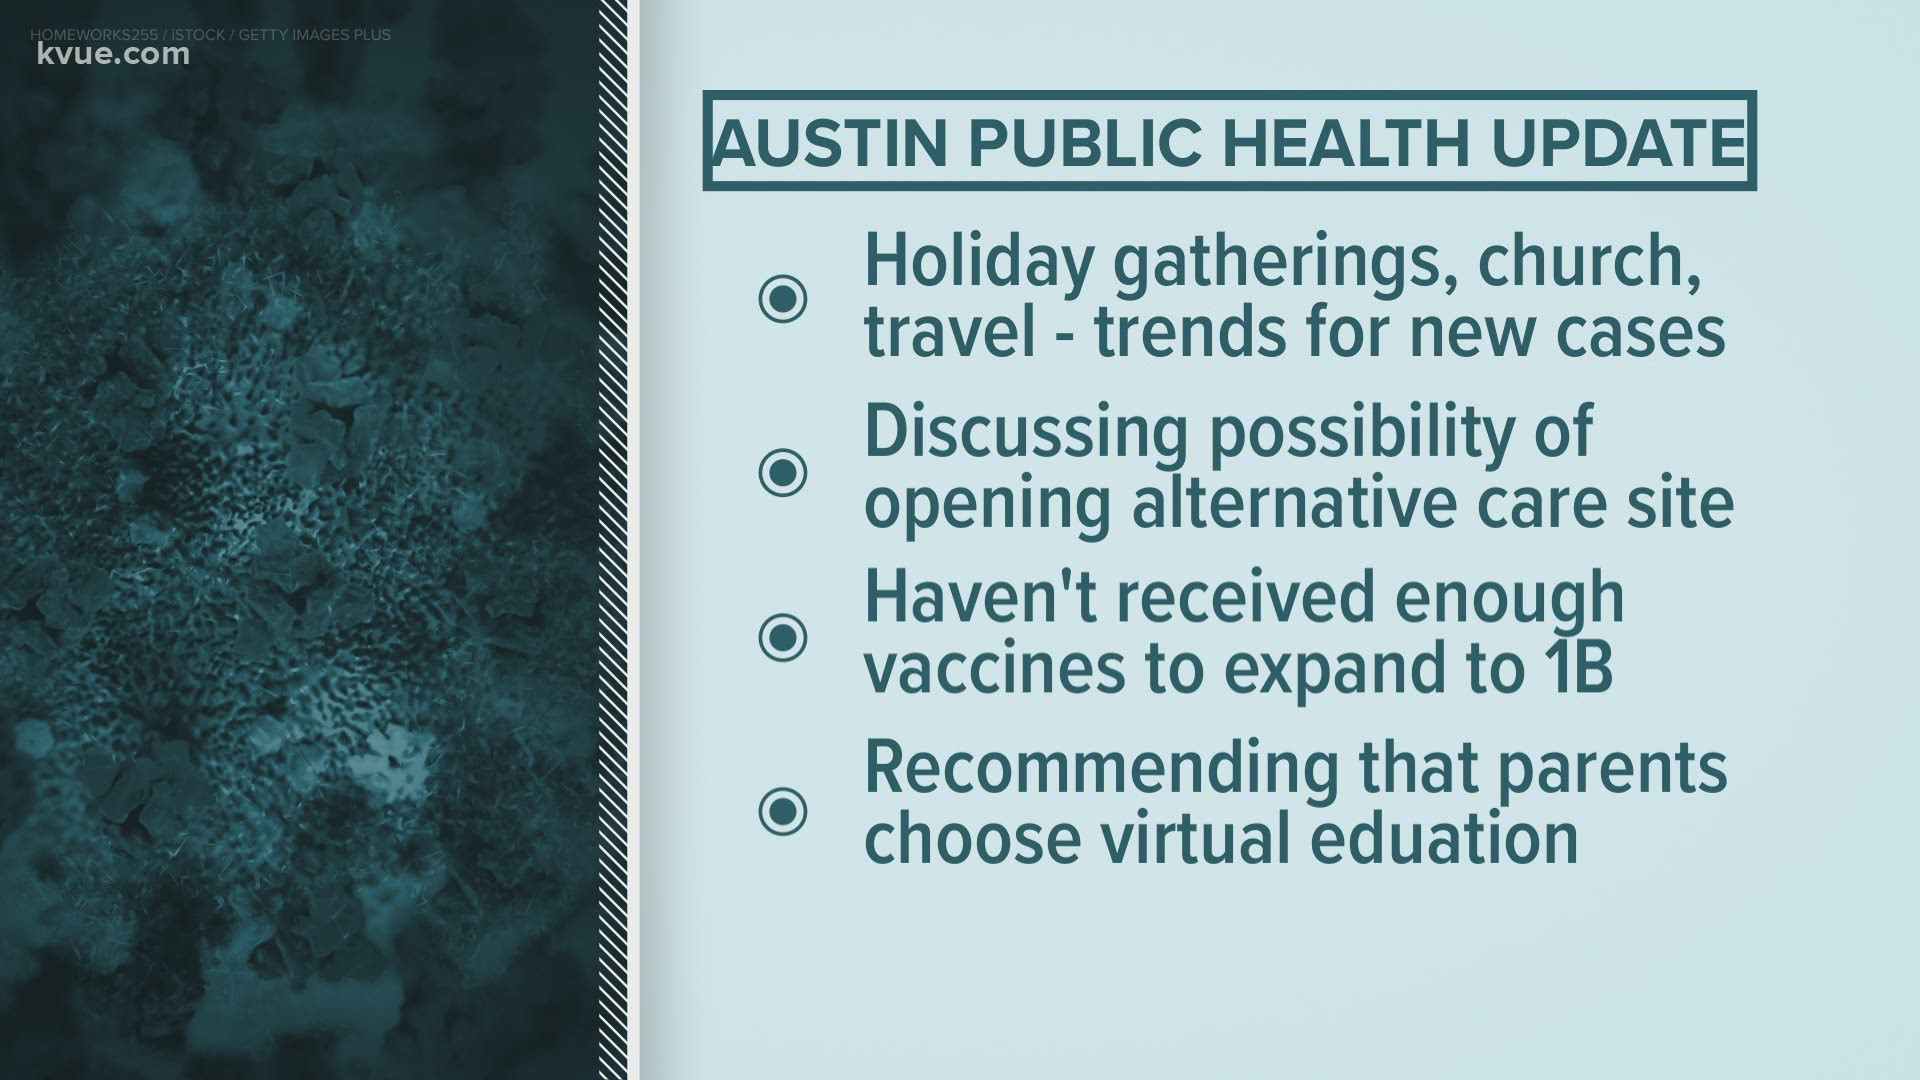 Austin Public Health gave its weekly COVID-19 update Wednesday, where health leaders discussed ICU capacity, an alternative care site and more.